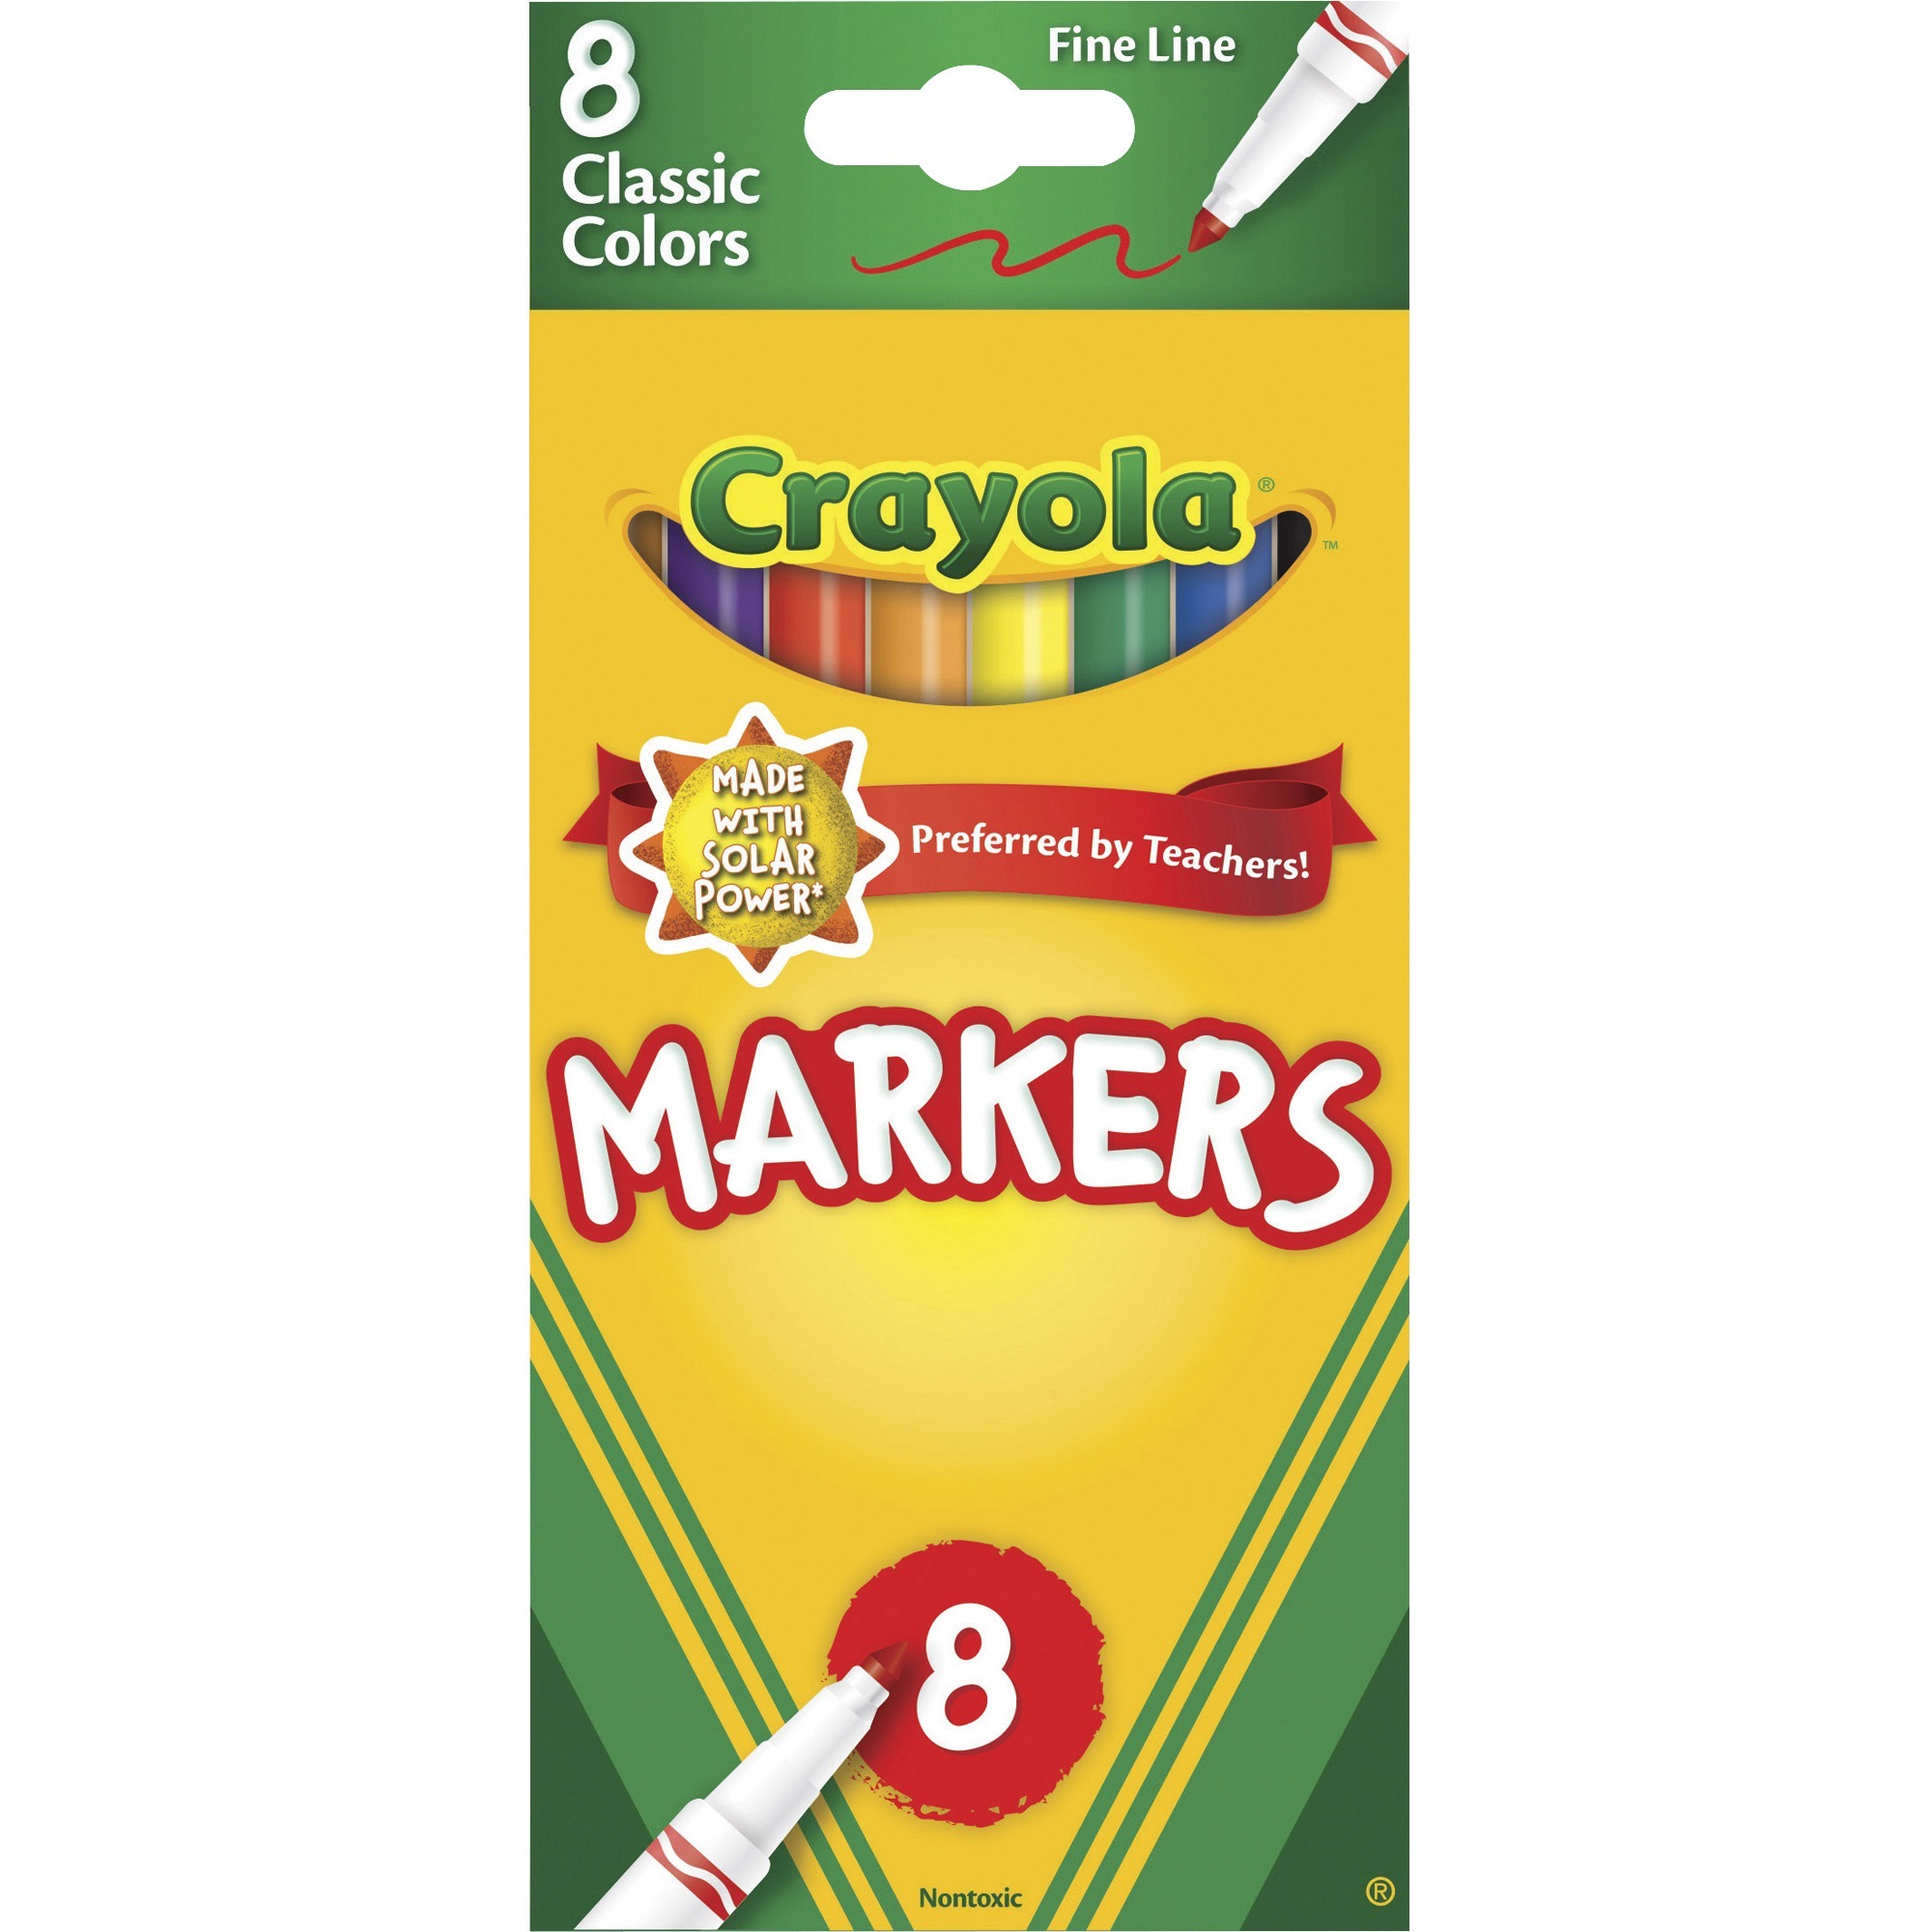 Water　Ray-Block　Co.,　Stationery　Assorted,　Set　Ink　Tip　Yellow,　Crayola　Crayola,　LLC　Blue,　Violet,　Markers　The　Black　Orange,　Markers　Green,　Fine　Marker　Point　Based　Classic　Inc.　Fine　Brown,